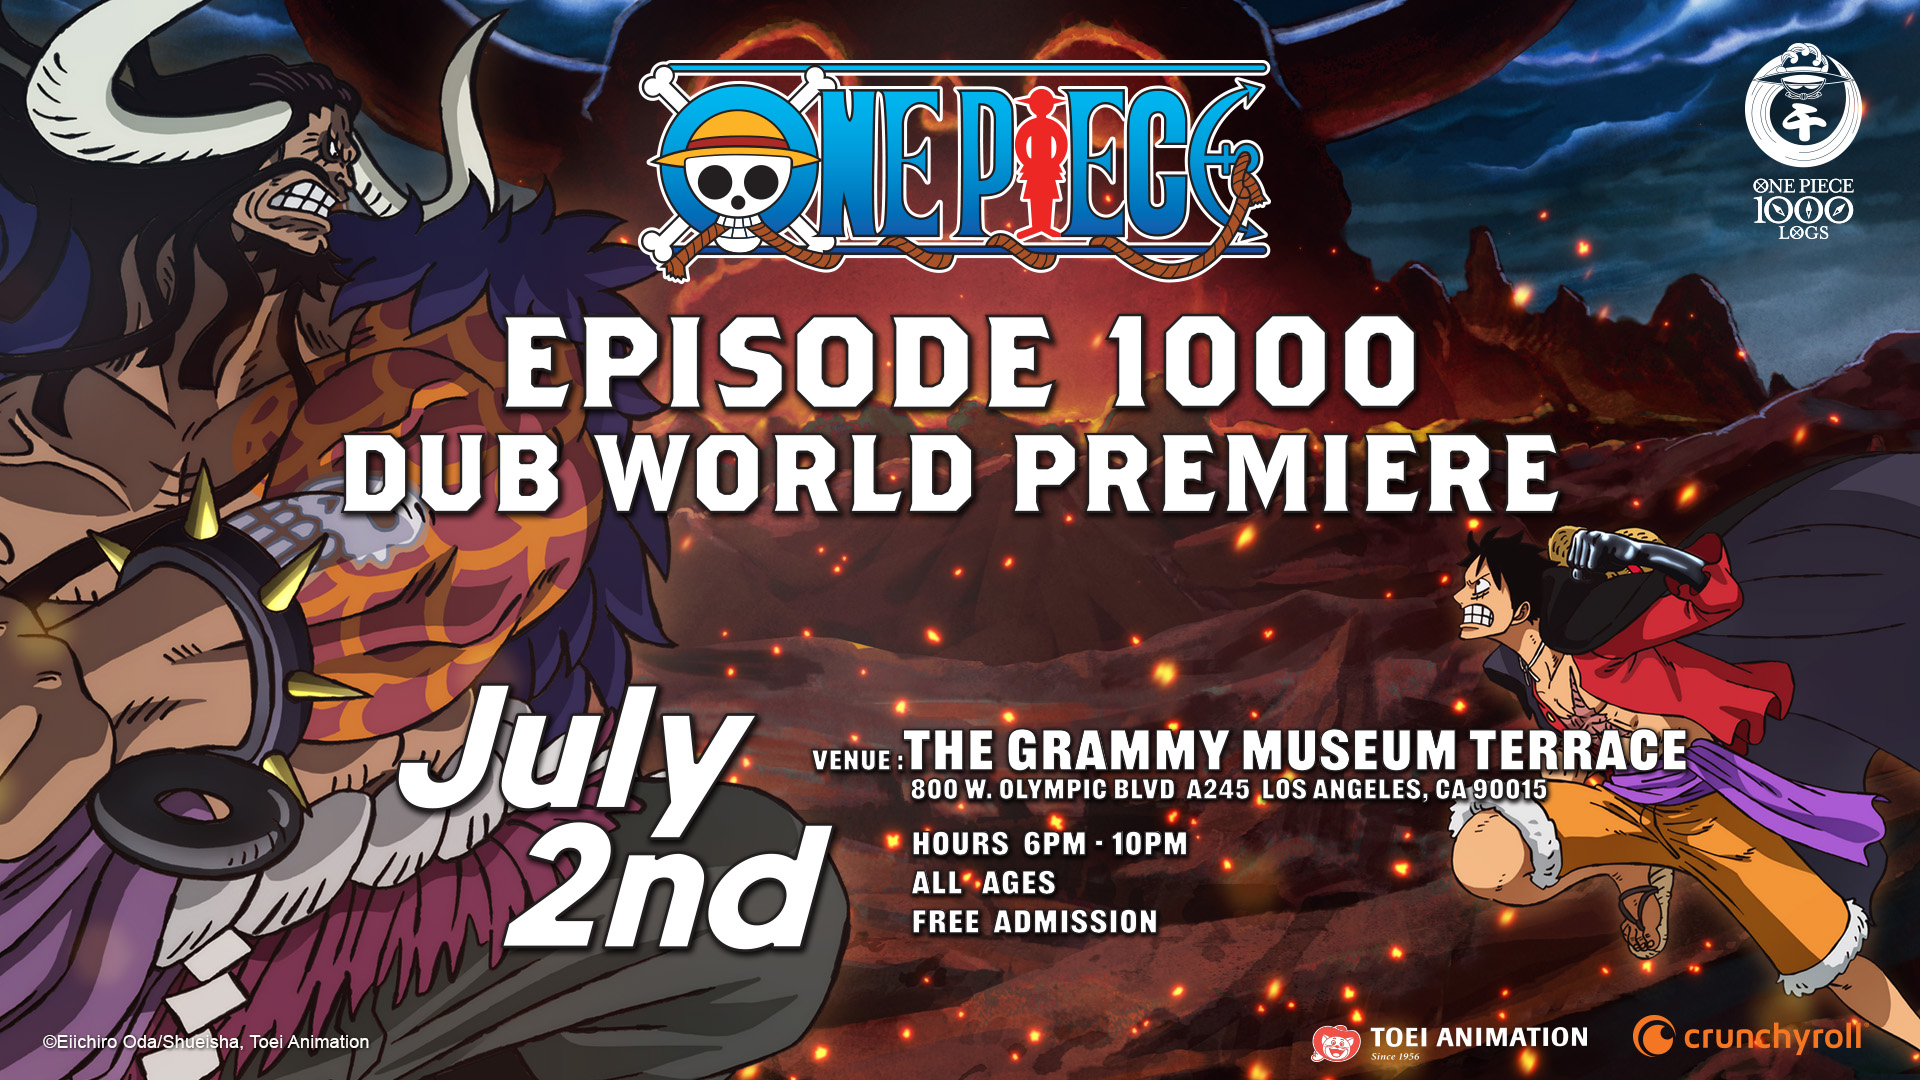 Toei Animation and Crunchyroll will be cohosting the special event